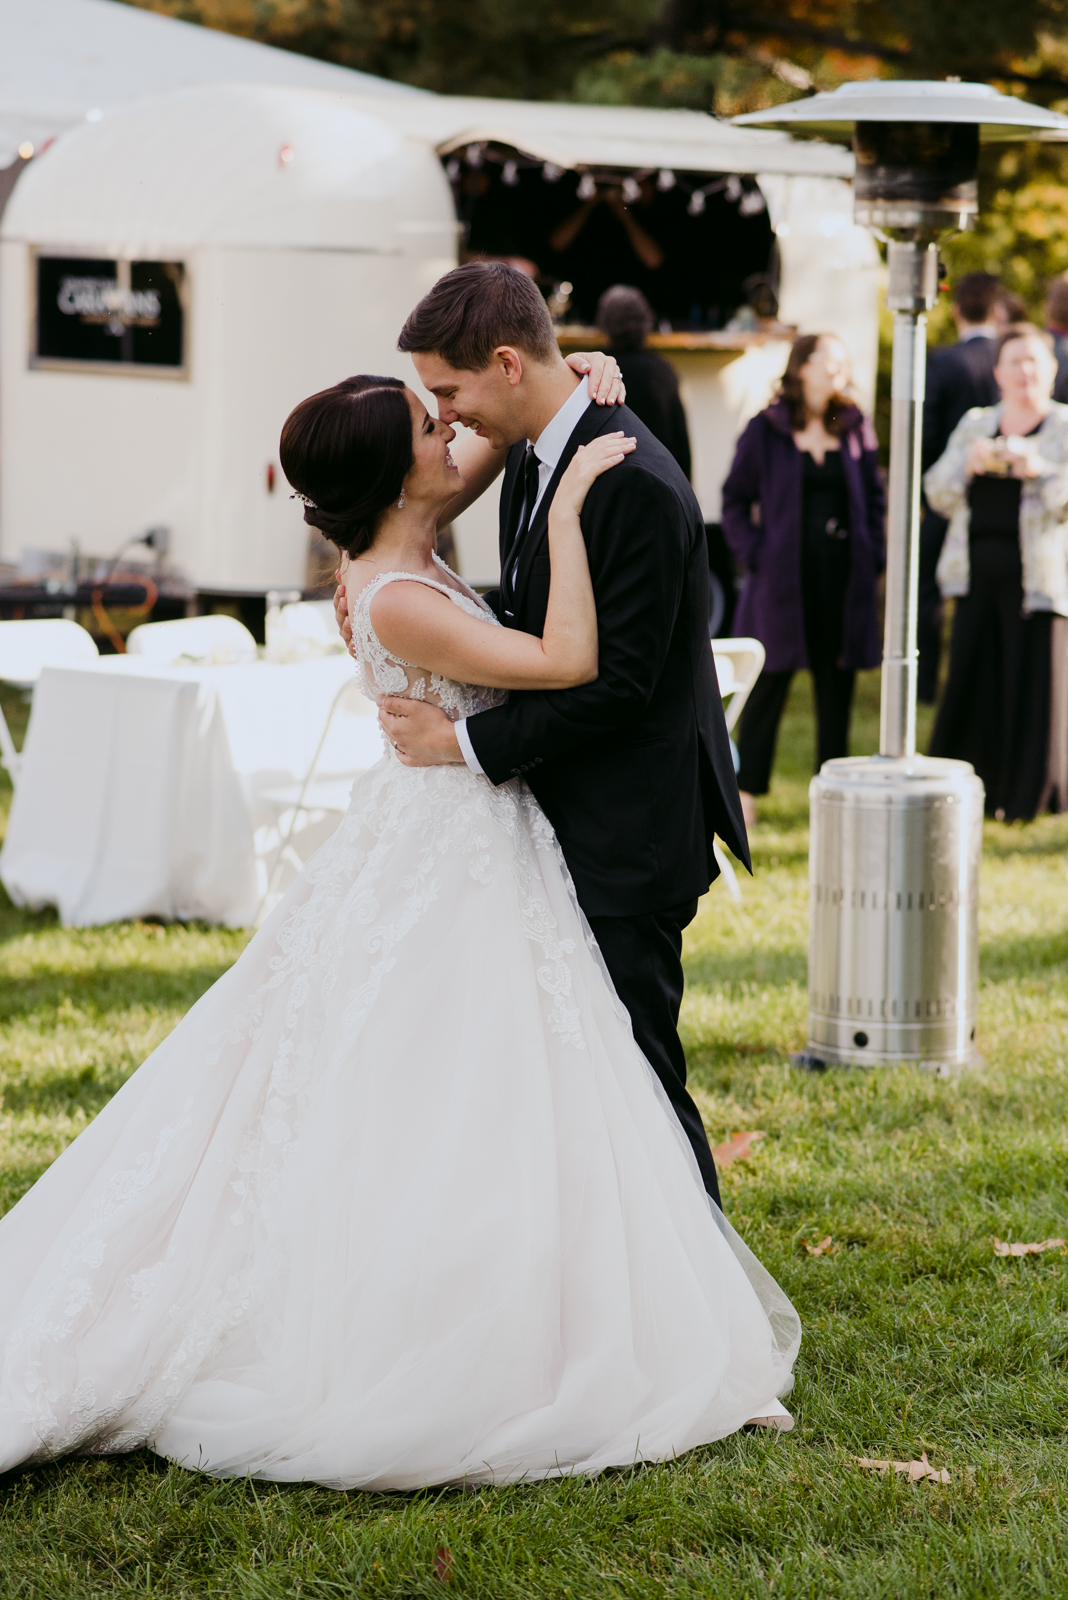 bride and groom first dance outdoors on the grass of garden party wedding